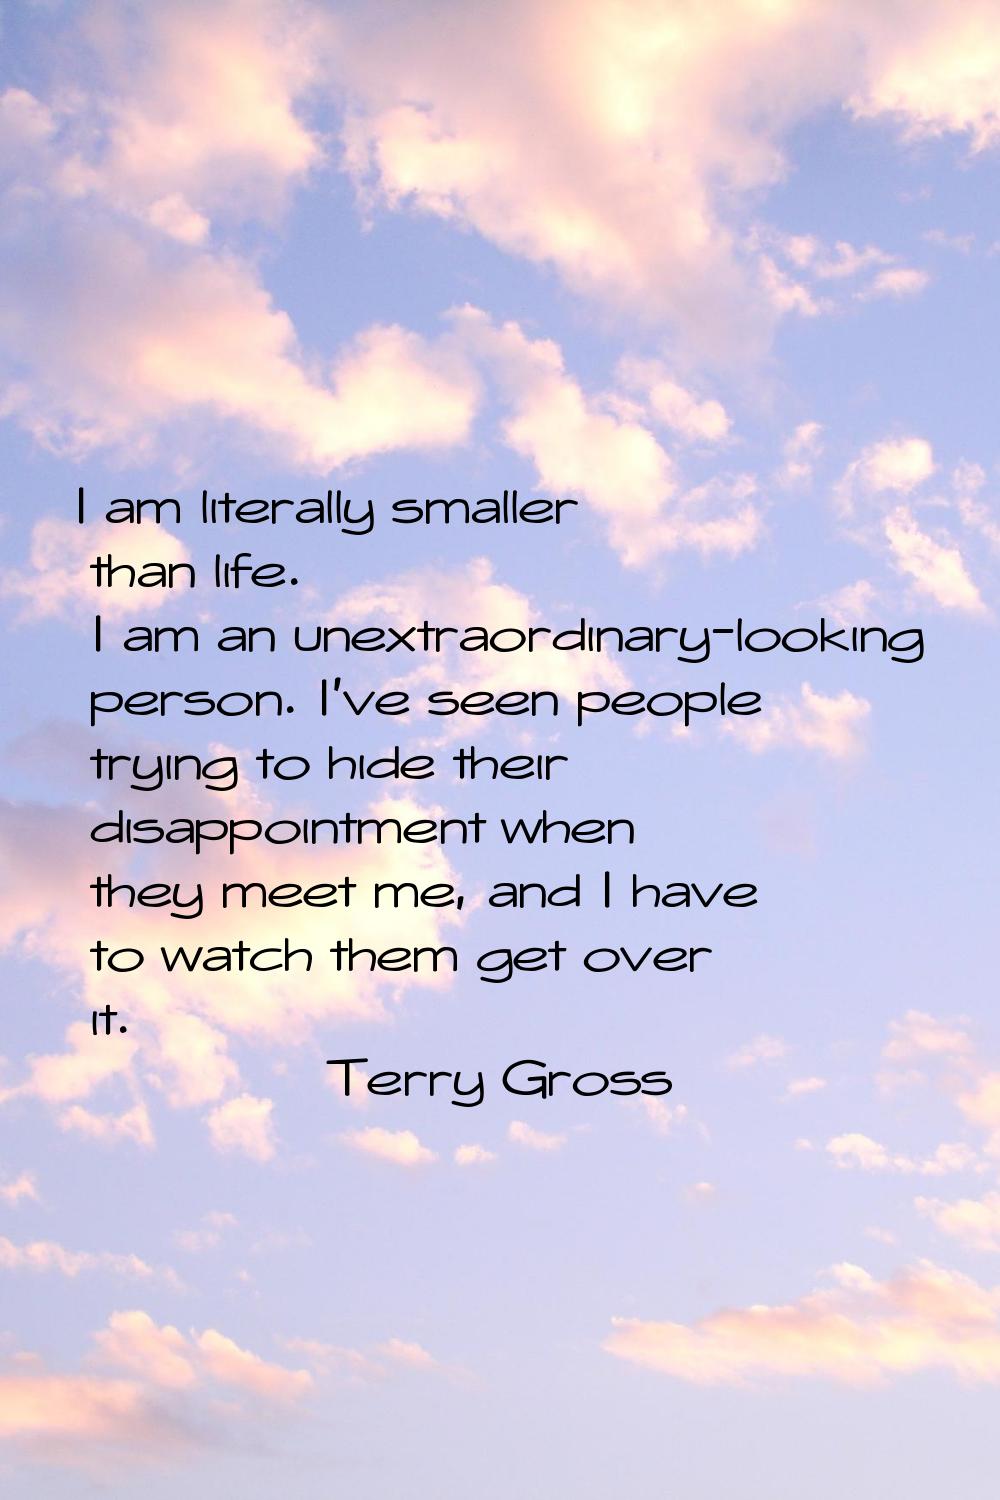 I am literally smaller than life. I am an unextraordinary-looking person. I've seen people trying t